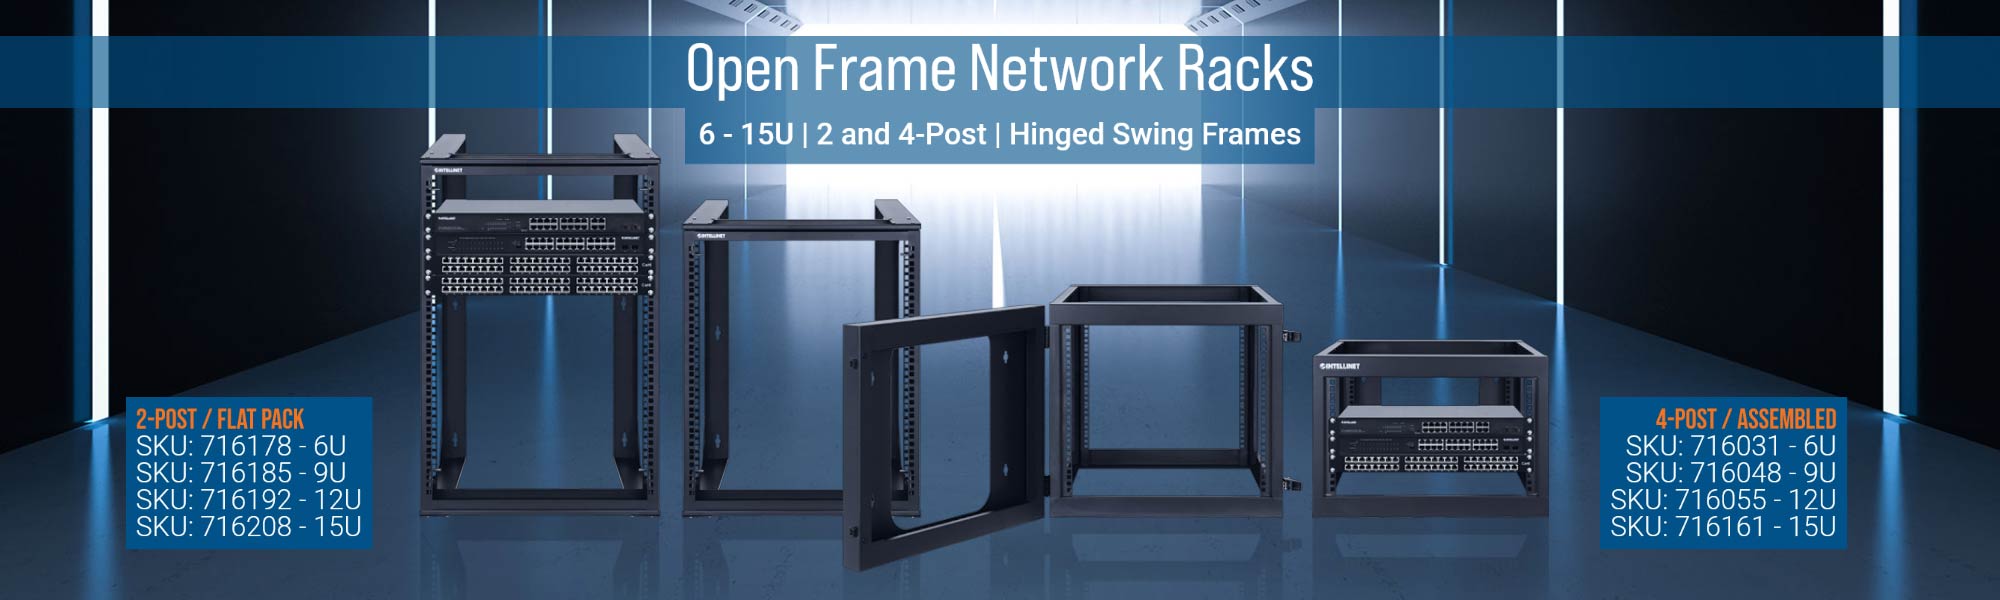 Open Frame Racks by Intellinet - View the Products